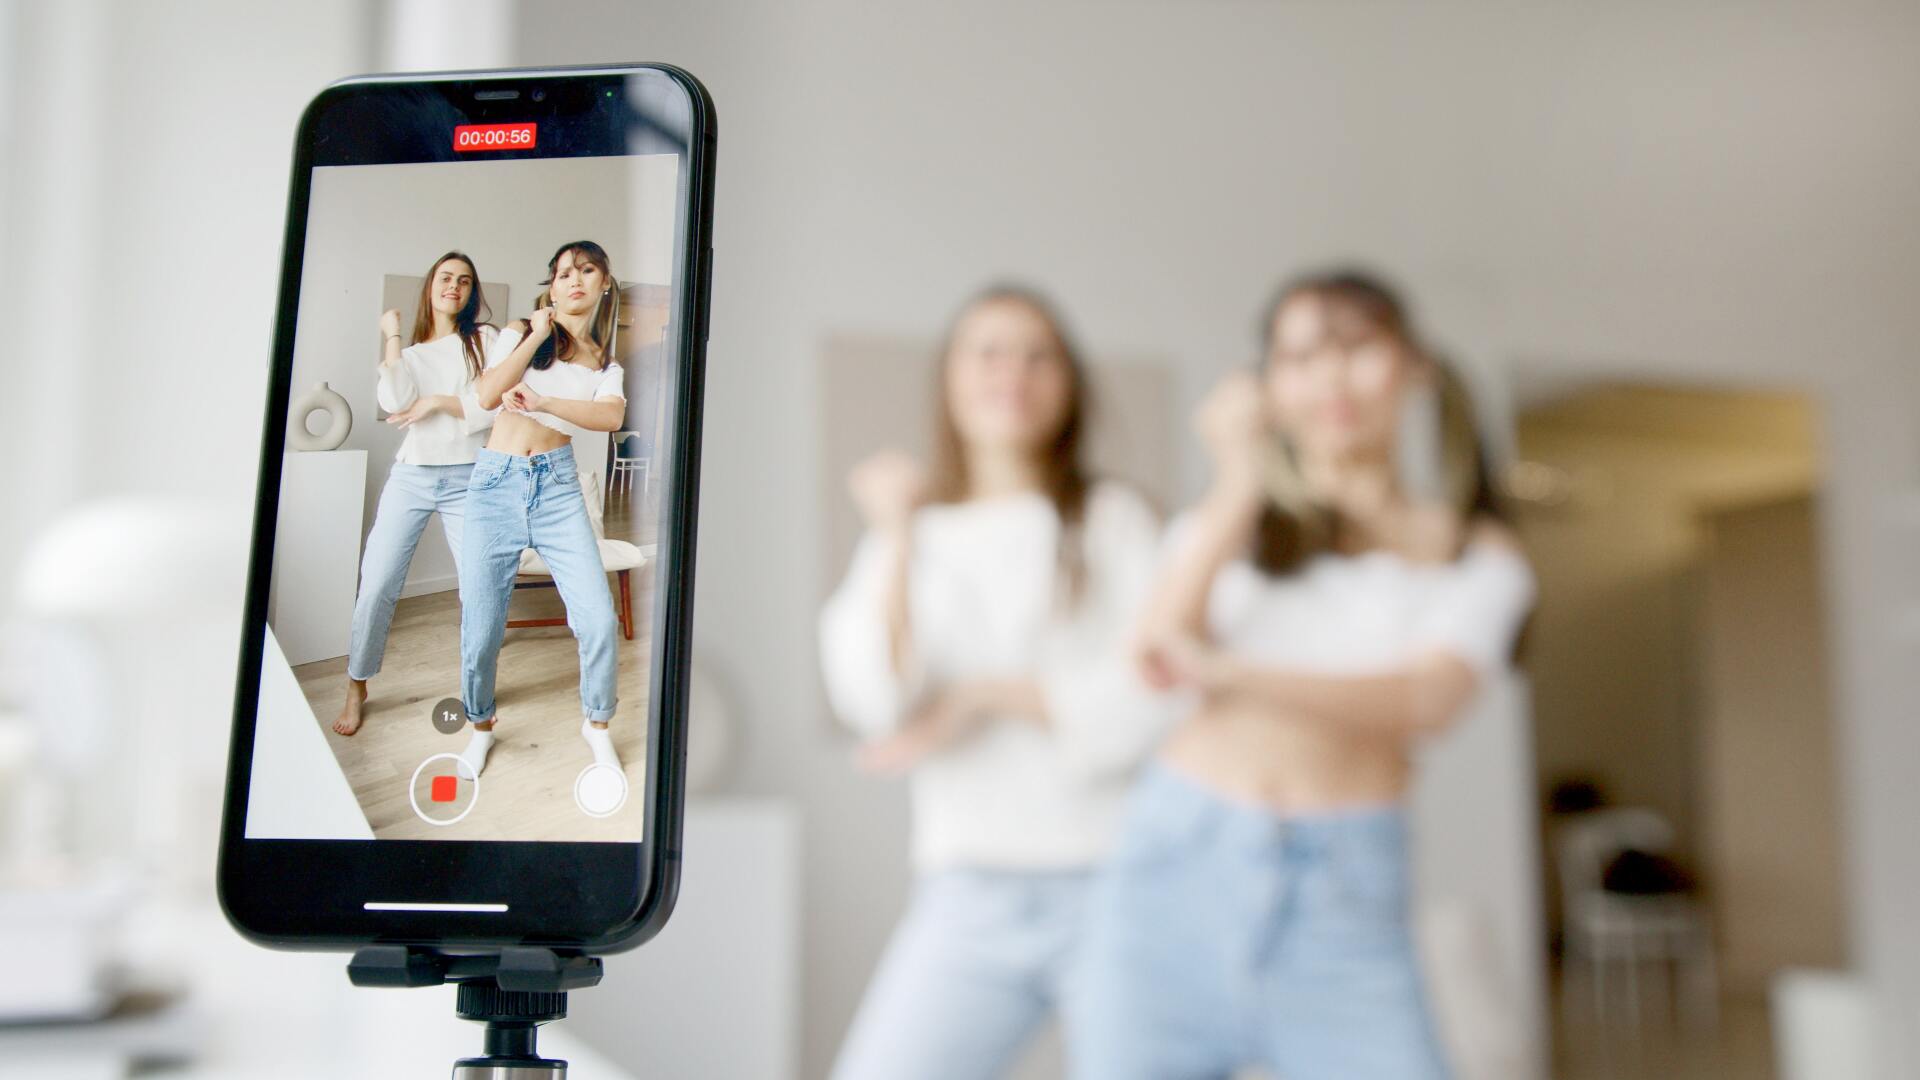 Women dancing in front of mobile phone for instagram social video